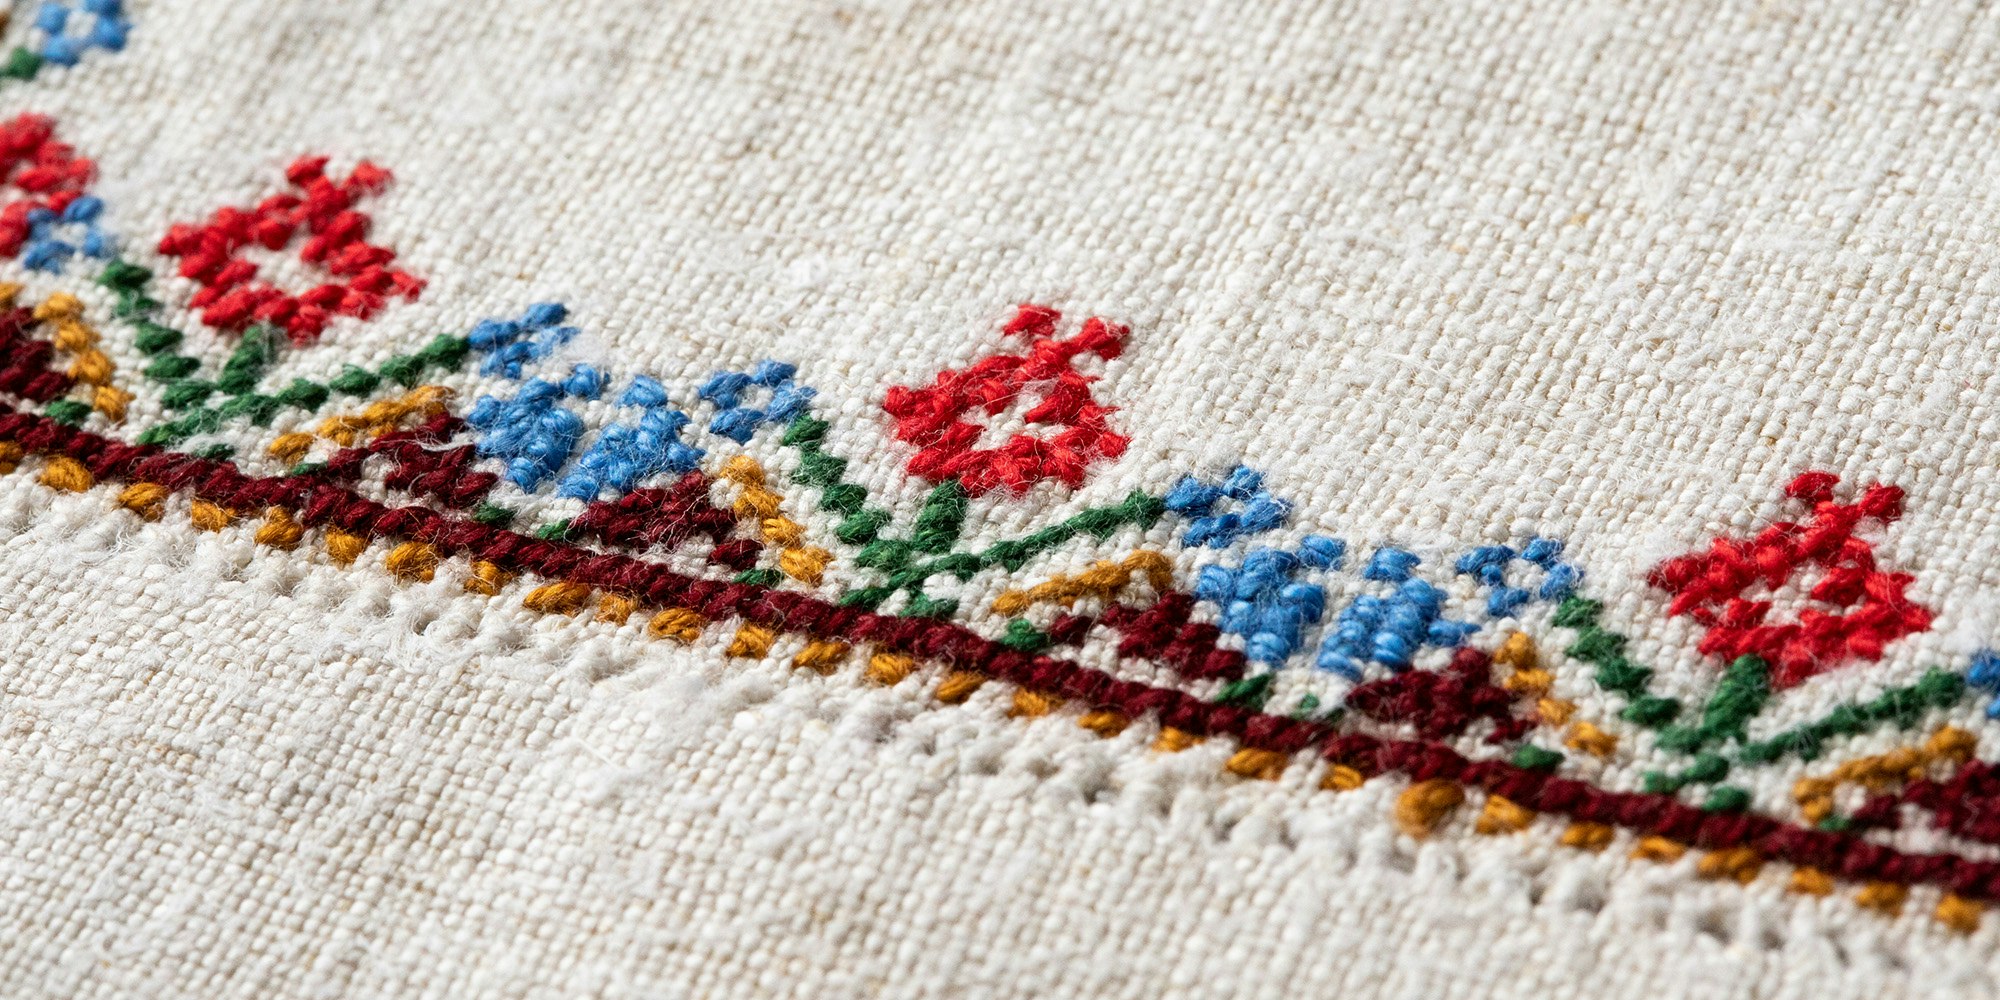 Hungarian Roots in Embroidery PieceWork